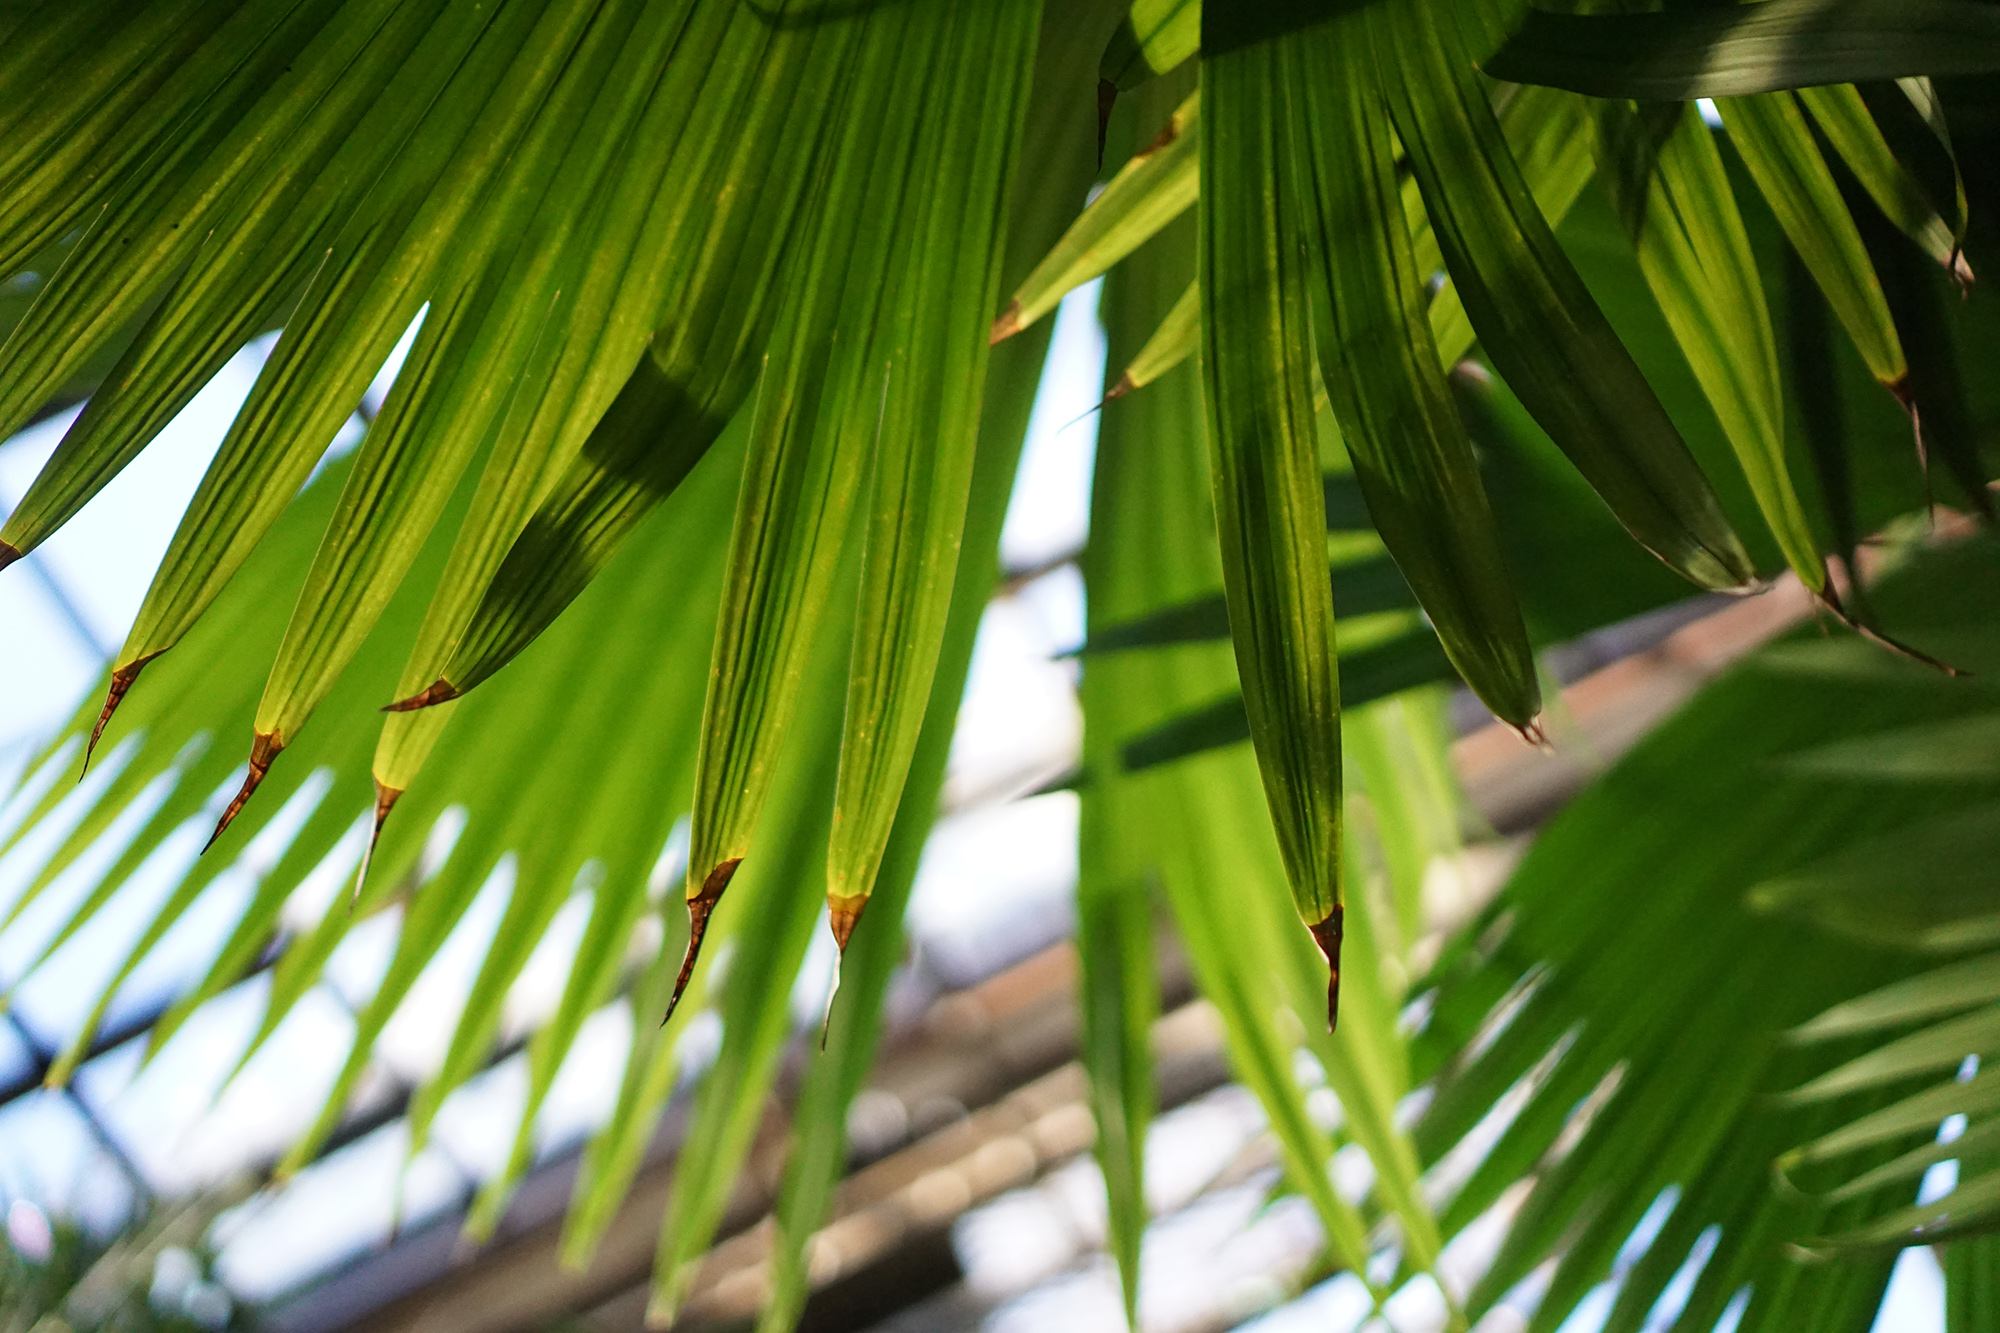 Palms in the Lincoln Park Conservatory, Chicago / Darker than Green